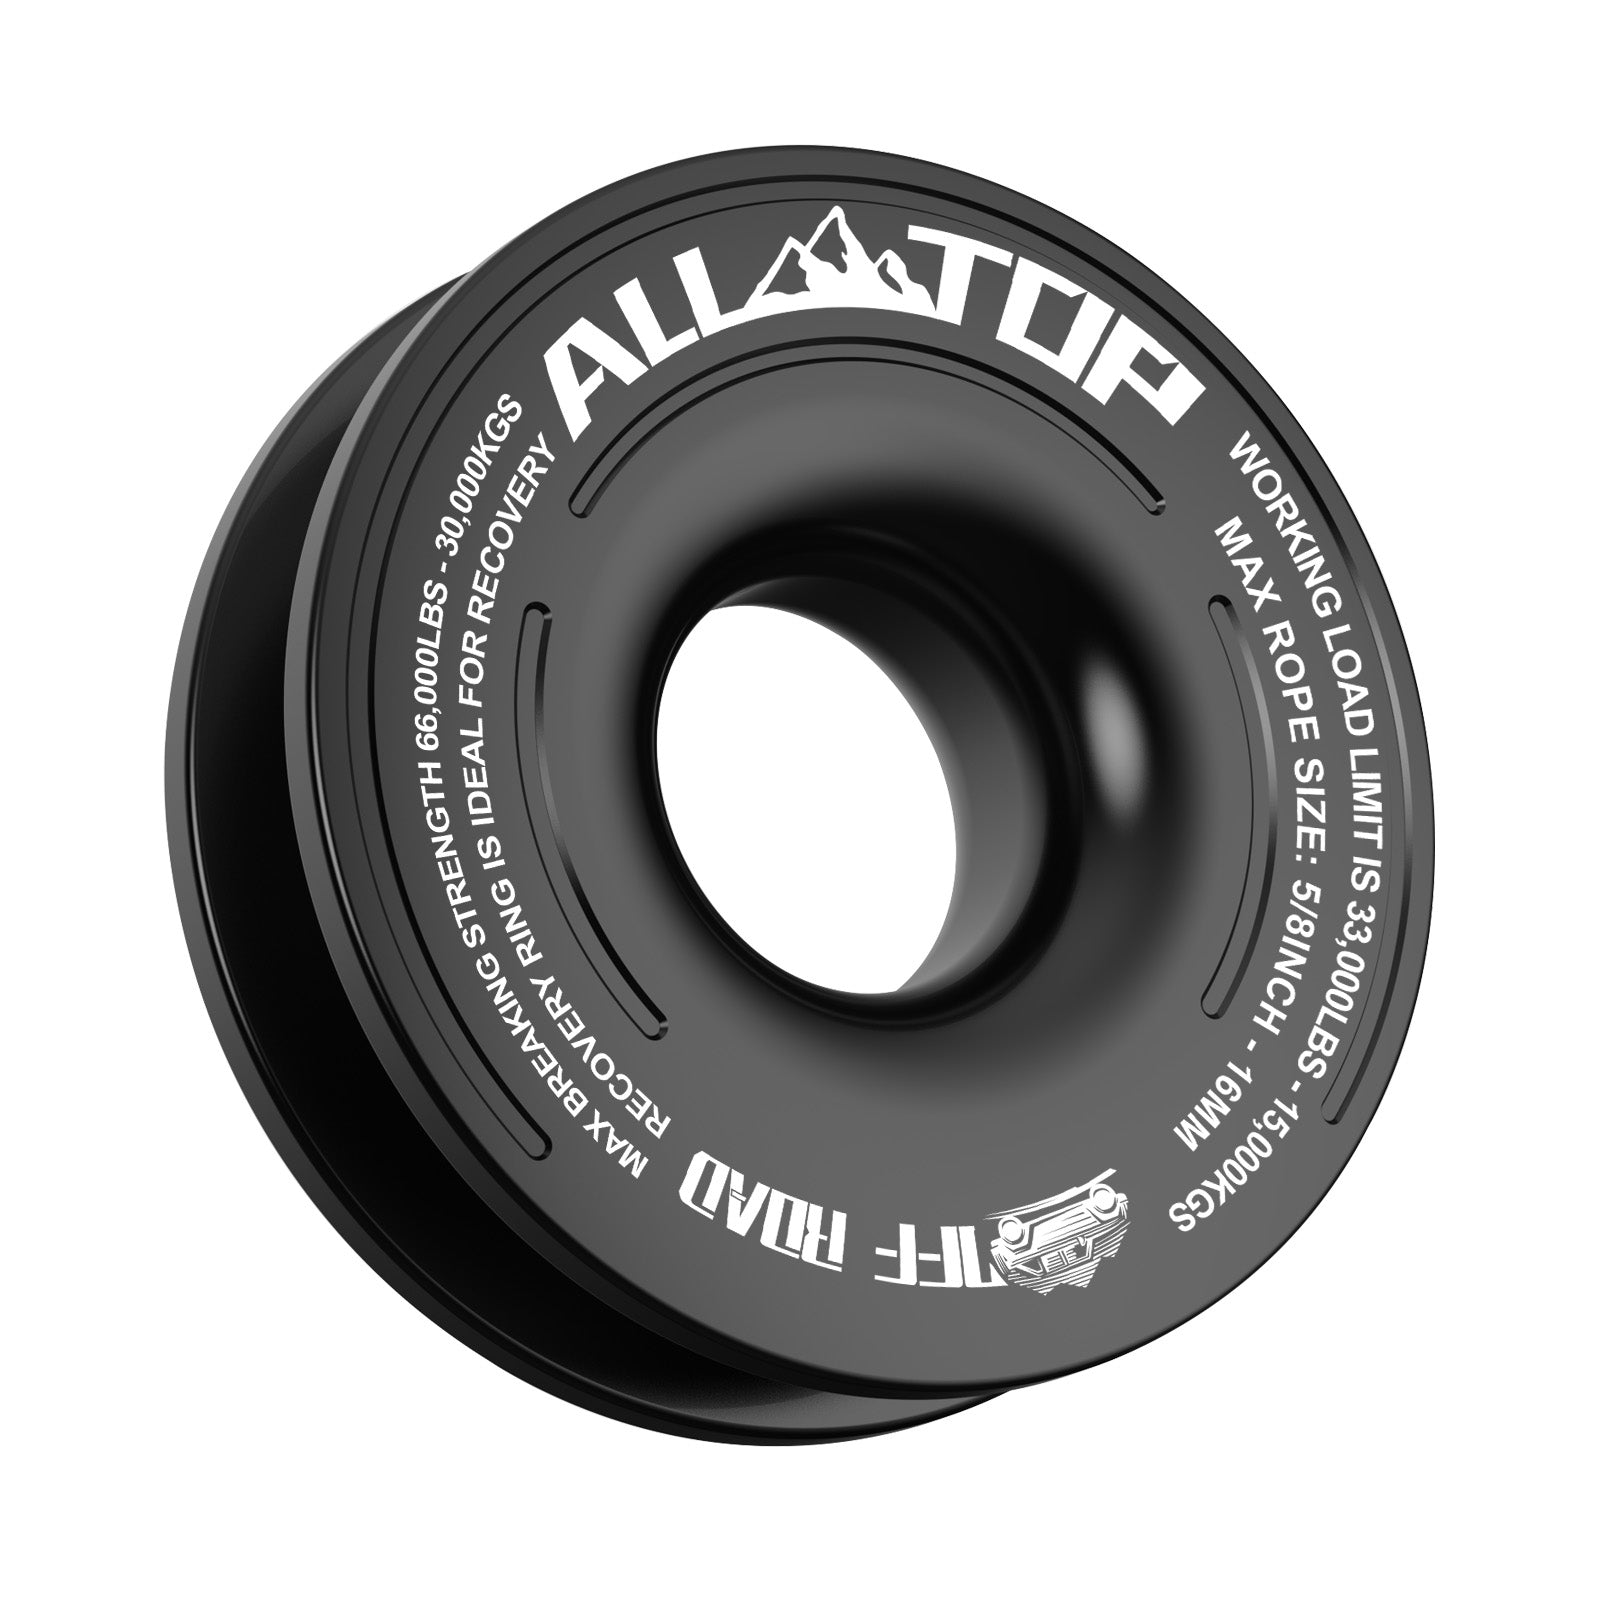 ALL-TOP Recovery Ring - 66,000 Lbs - Black